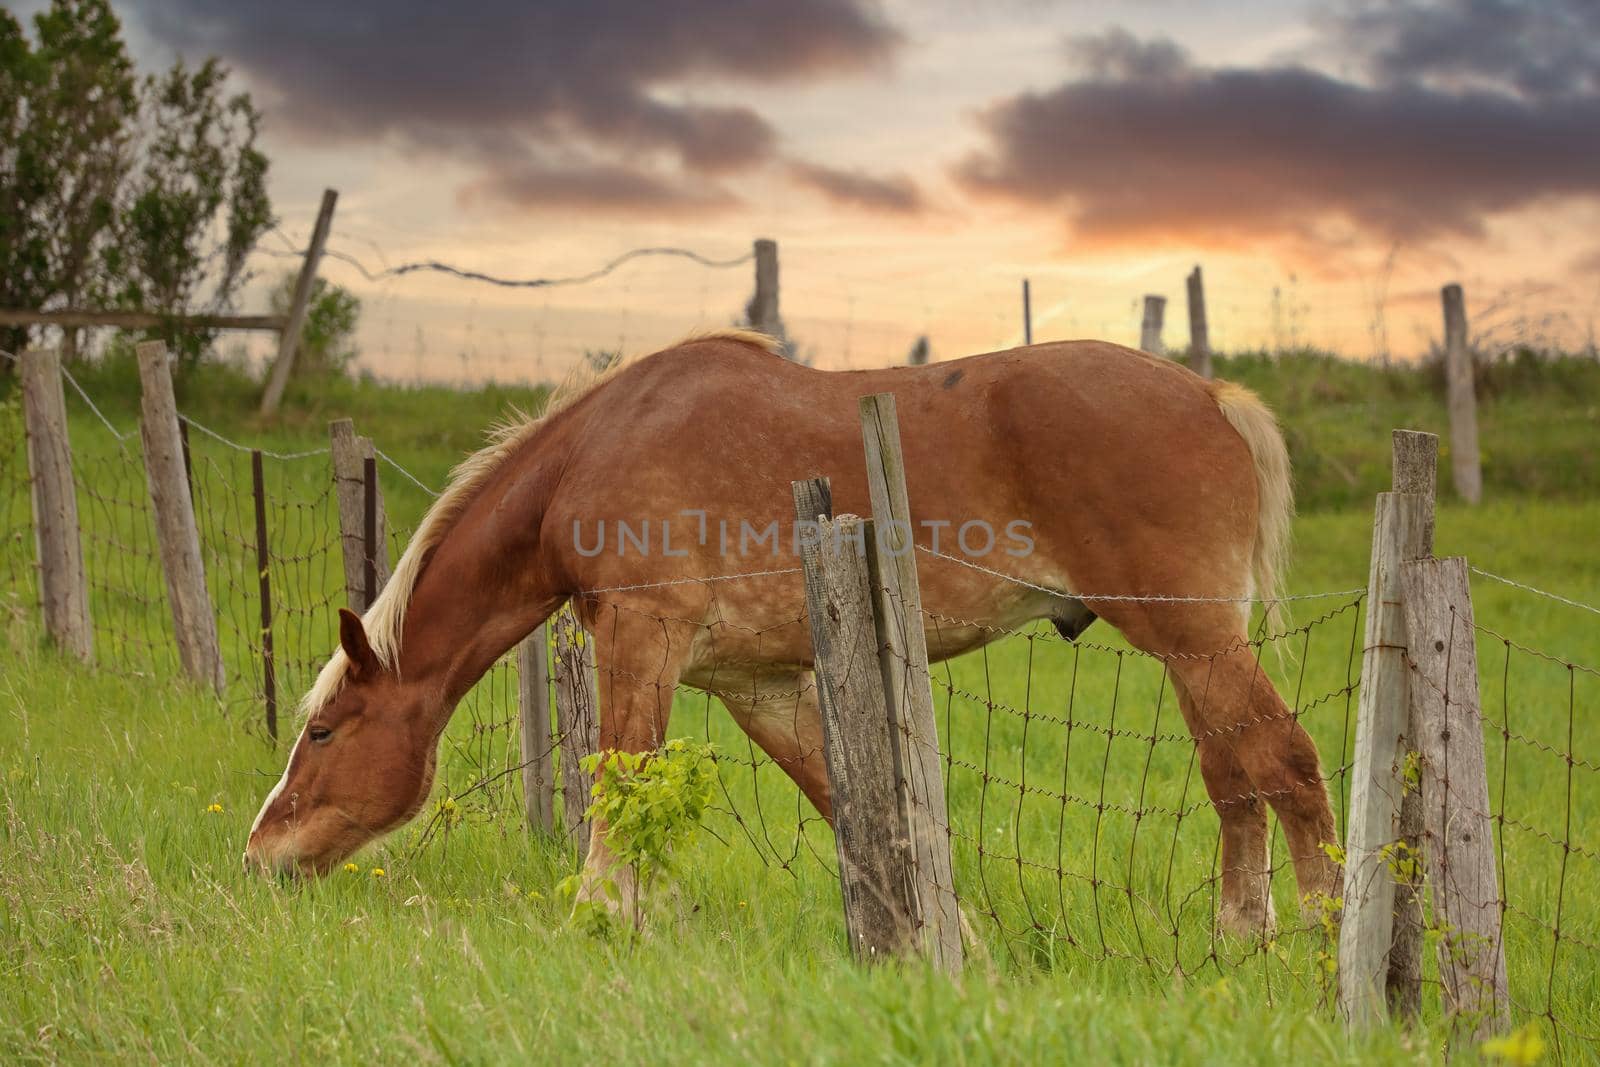 The Grass is Always Greener on the Other Side of the Fence. Horse reaches over wire fence to get grass in the ditch rather than in the pasture. Flaxen Chestnut breed.